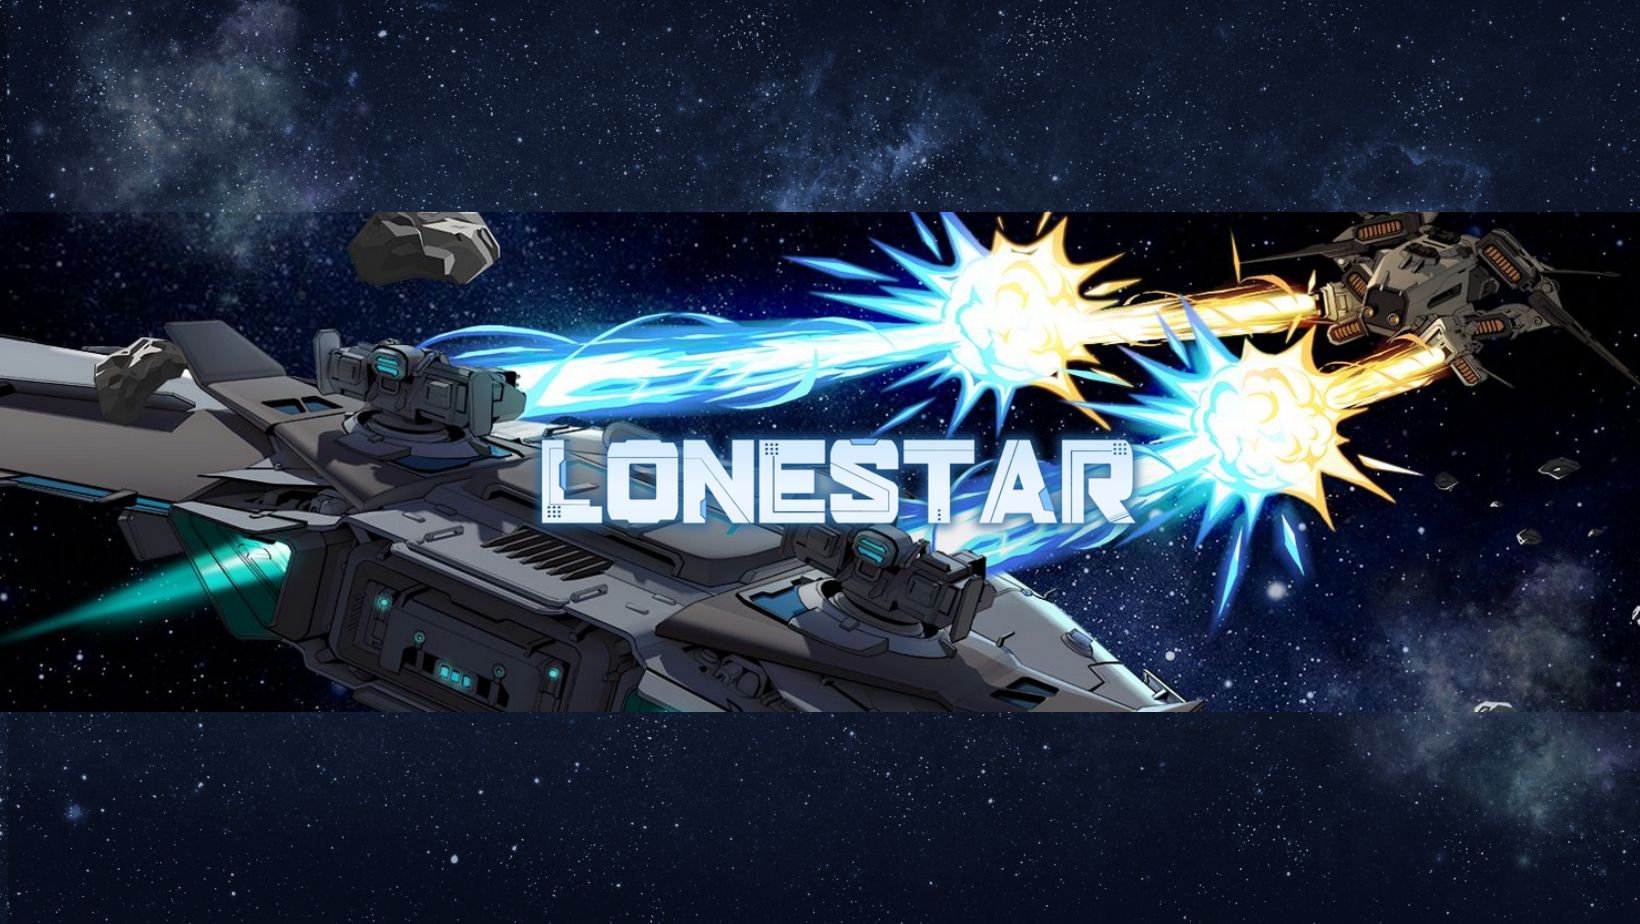 Two spaceships battle behind text that says LONESTAR